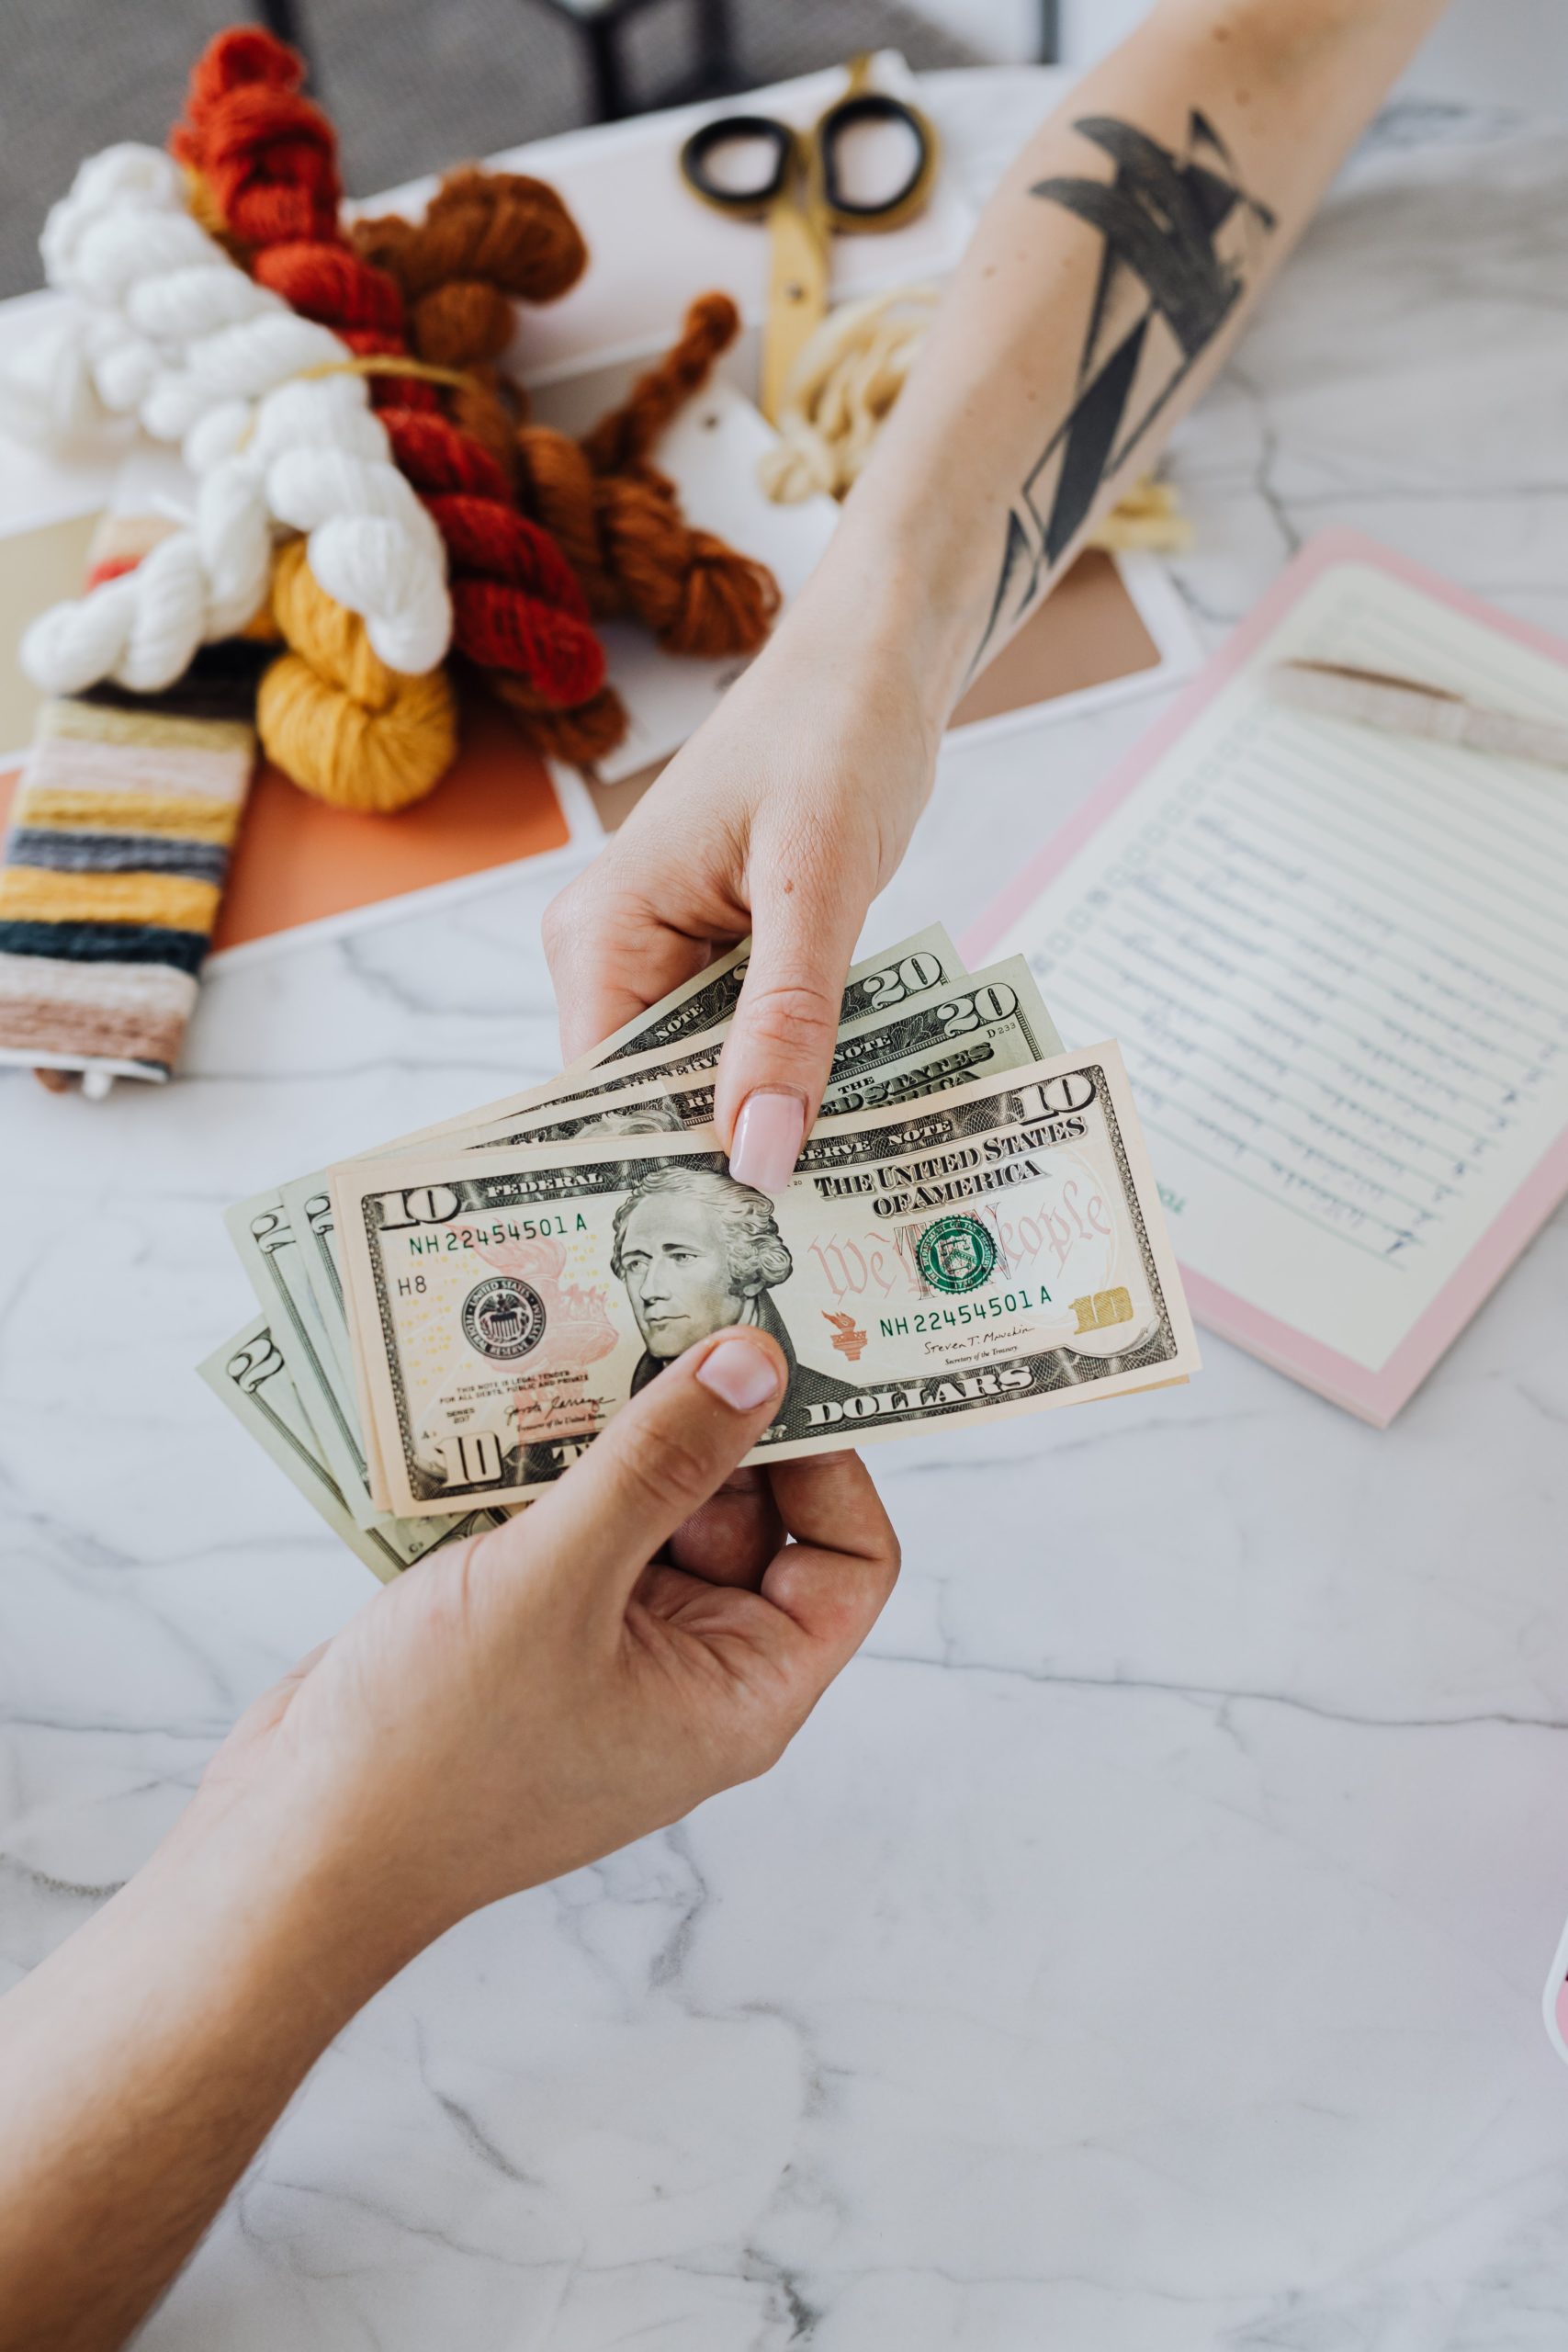 Practical Tips to Help You Master Budgeting and Save Money